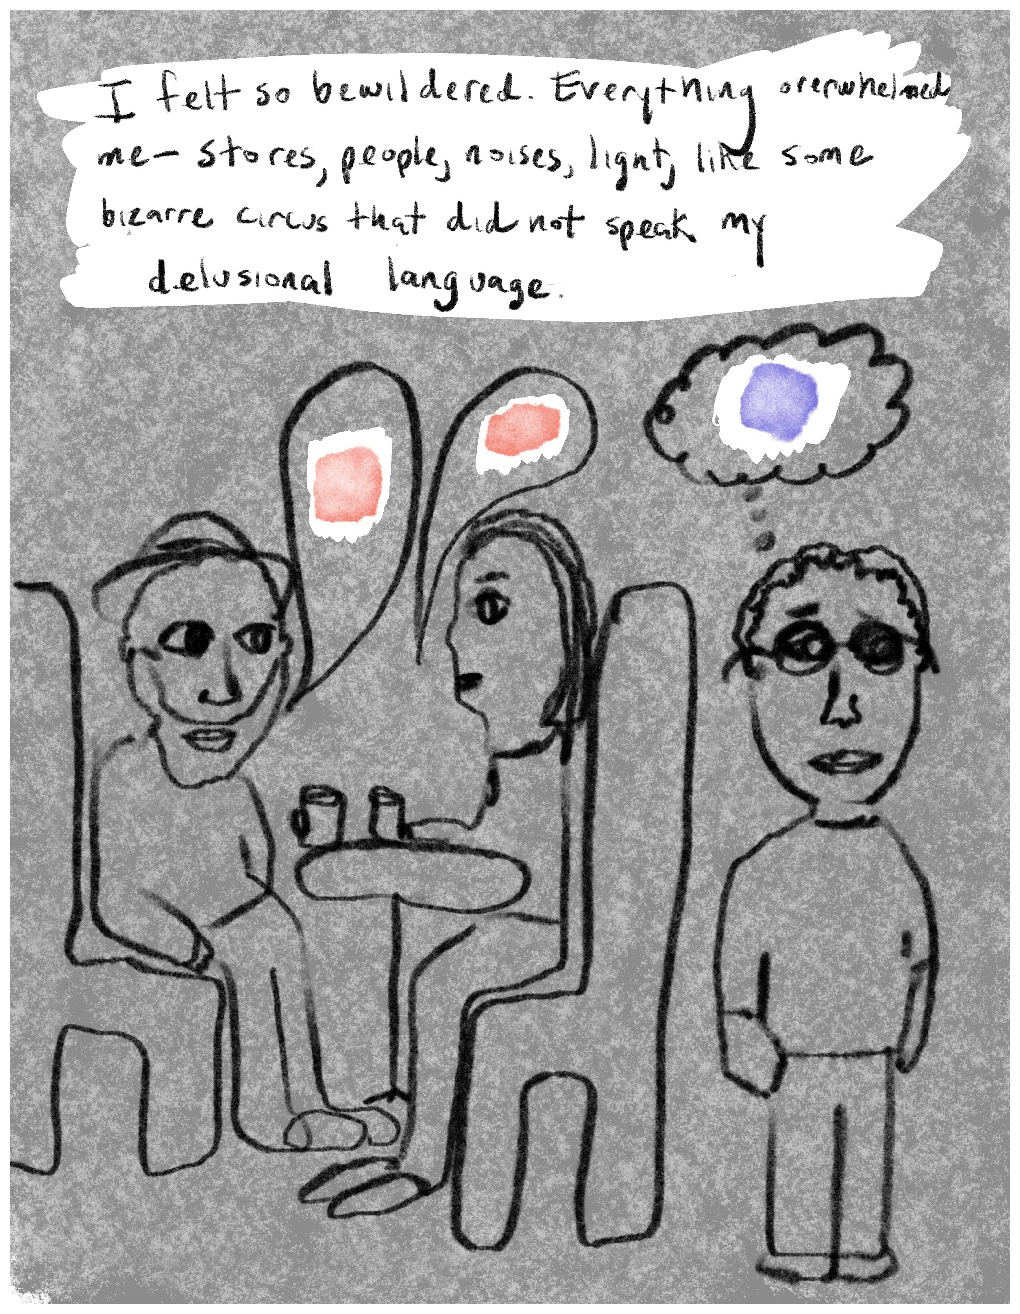 Panel 3 of a six-panel comic called 'Walled in by psychosis', consisting of thick black line drawing on a mottled grey background.  A white text area at the top of the panel says "I felt so bewildered. Everything overwhelmed me - stores, people, noises, light, like some bizarre circus that did not speak my delusional language". Below the text, two crudely drawn figures sit in chairs facing each other across a small round table with two coffee mugs on it. Speech bubbles from the seated figures each contain a small pale pink daub of colour. A young male figure  with glasses stands alone, to the right of the seated figures, with a sad expression on his face. A thought bubble from him contains a daub of pale purple colour.